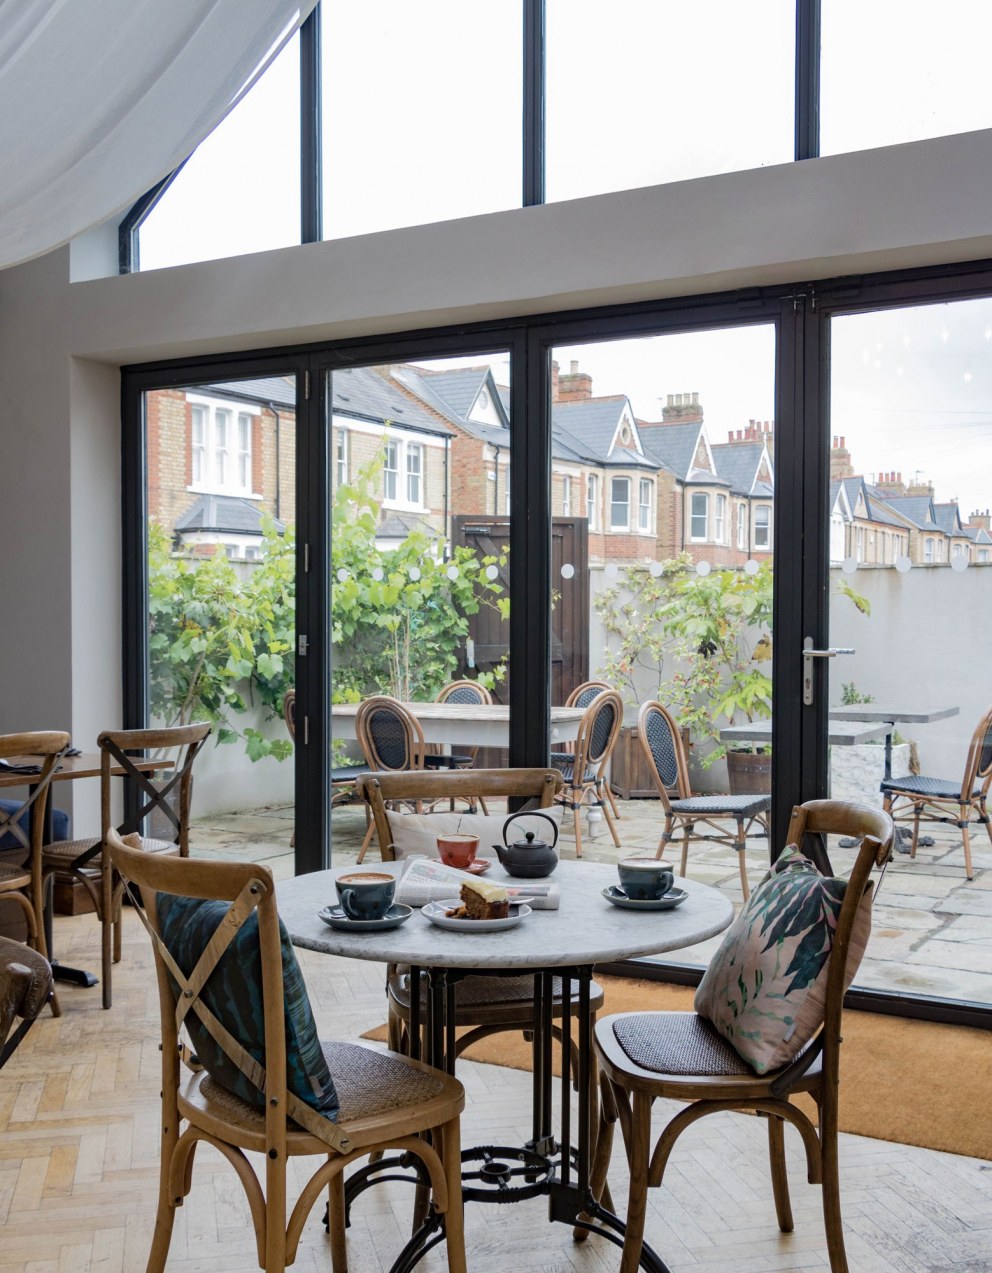 ThirtyEight, Summertown Oxford | Central dining room with large windows looking out onto the private courtyard | Interior Designers